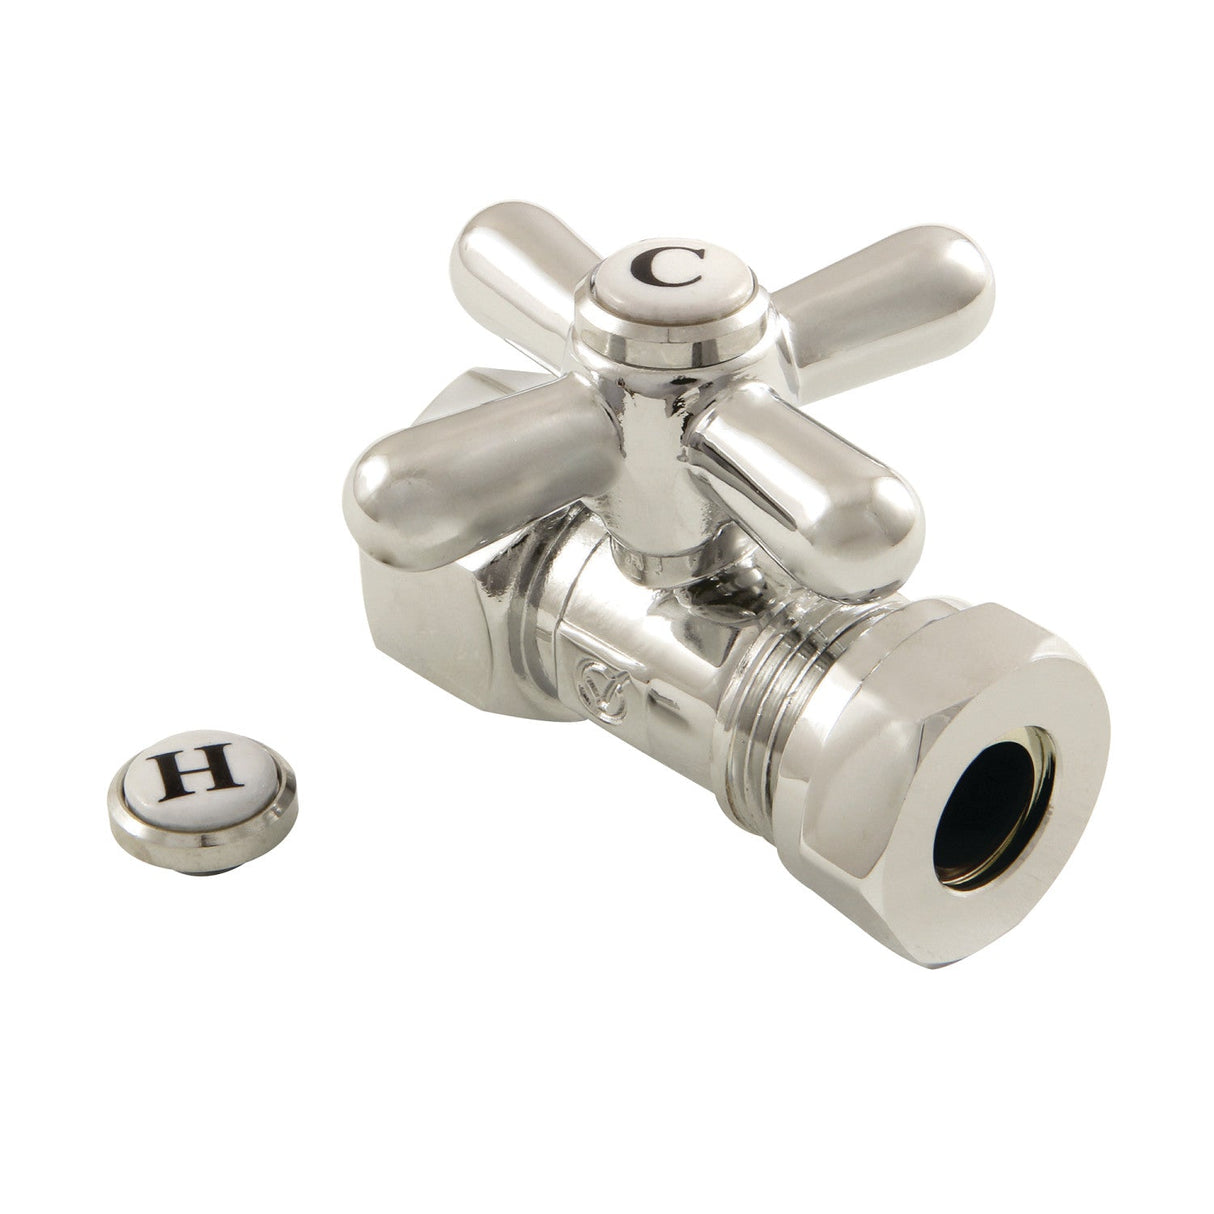 Vintage CC44156X 1/2-Inch FIP x 1/2 or 7/16-Inch Slip Joint Quarter-Turn Straight Stop Valve, Polished Nickel